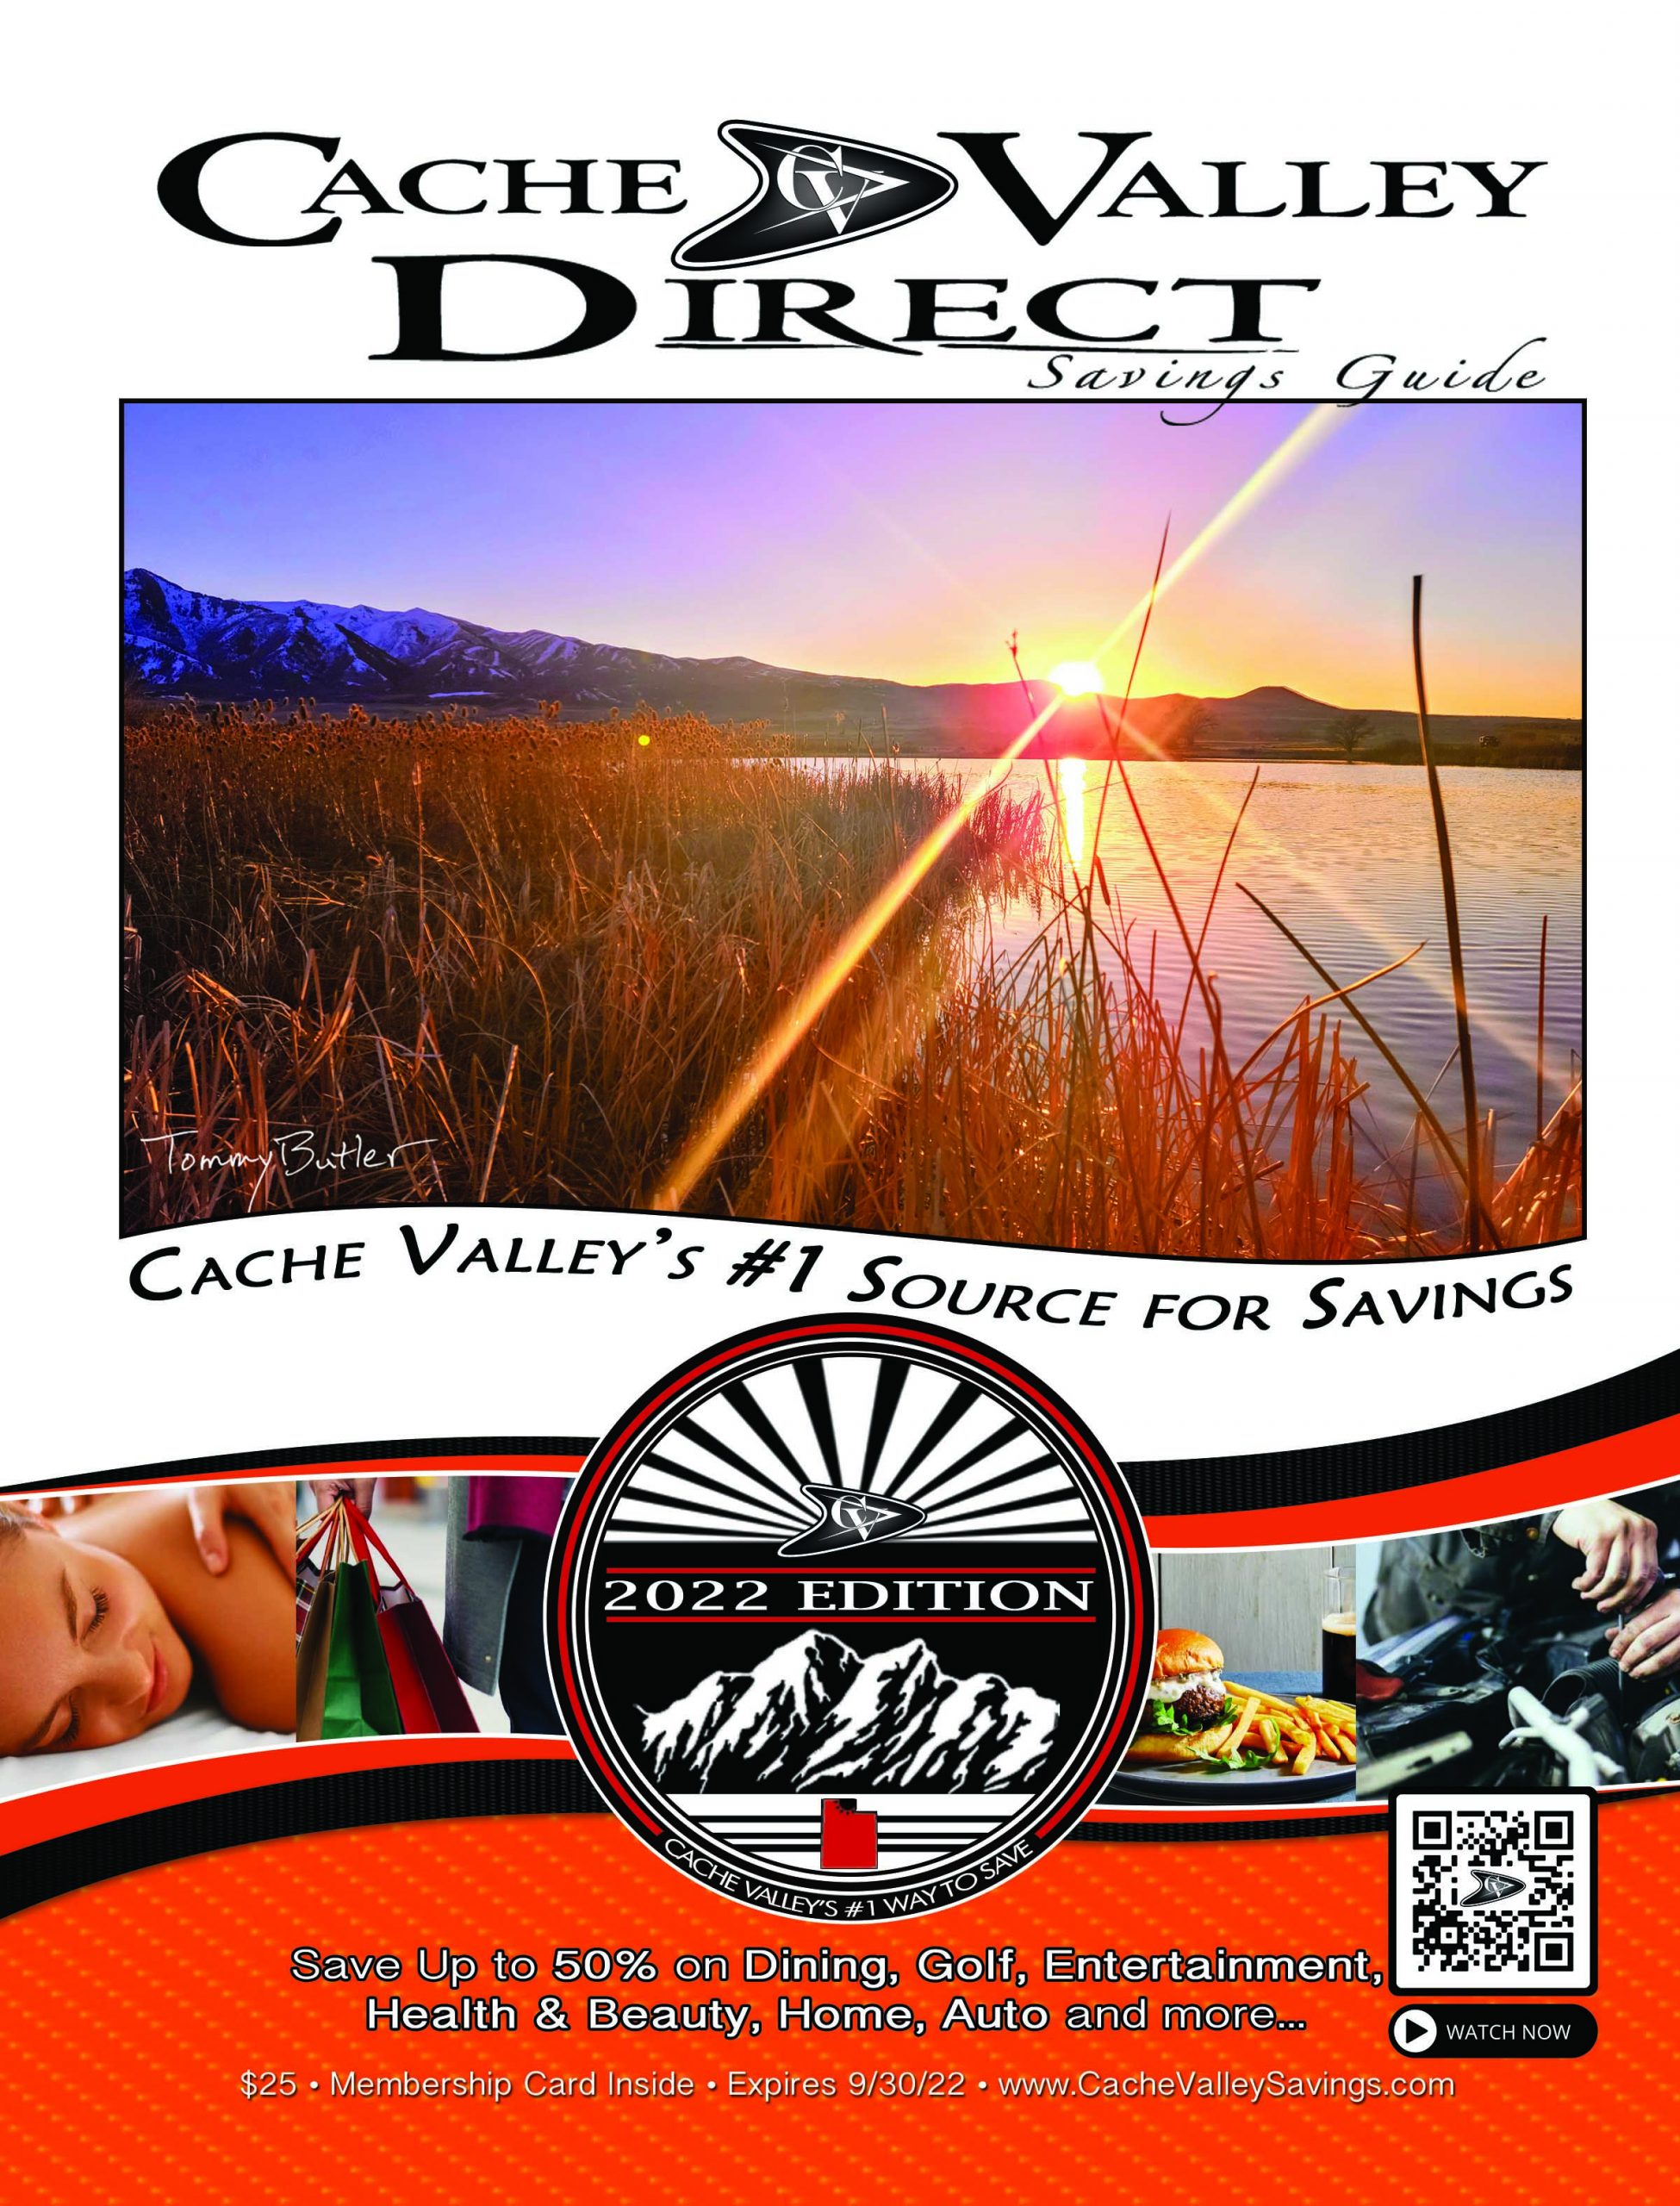 Cache Valley Direct Savings Guide